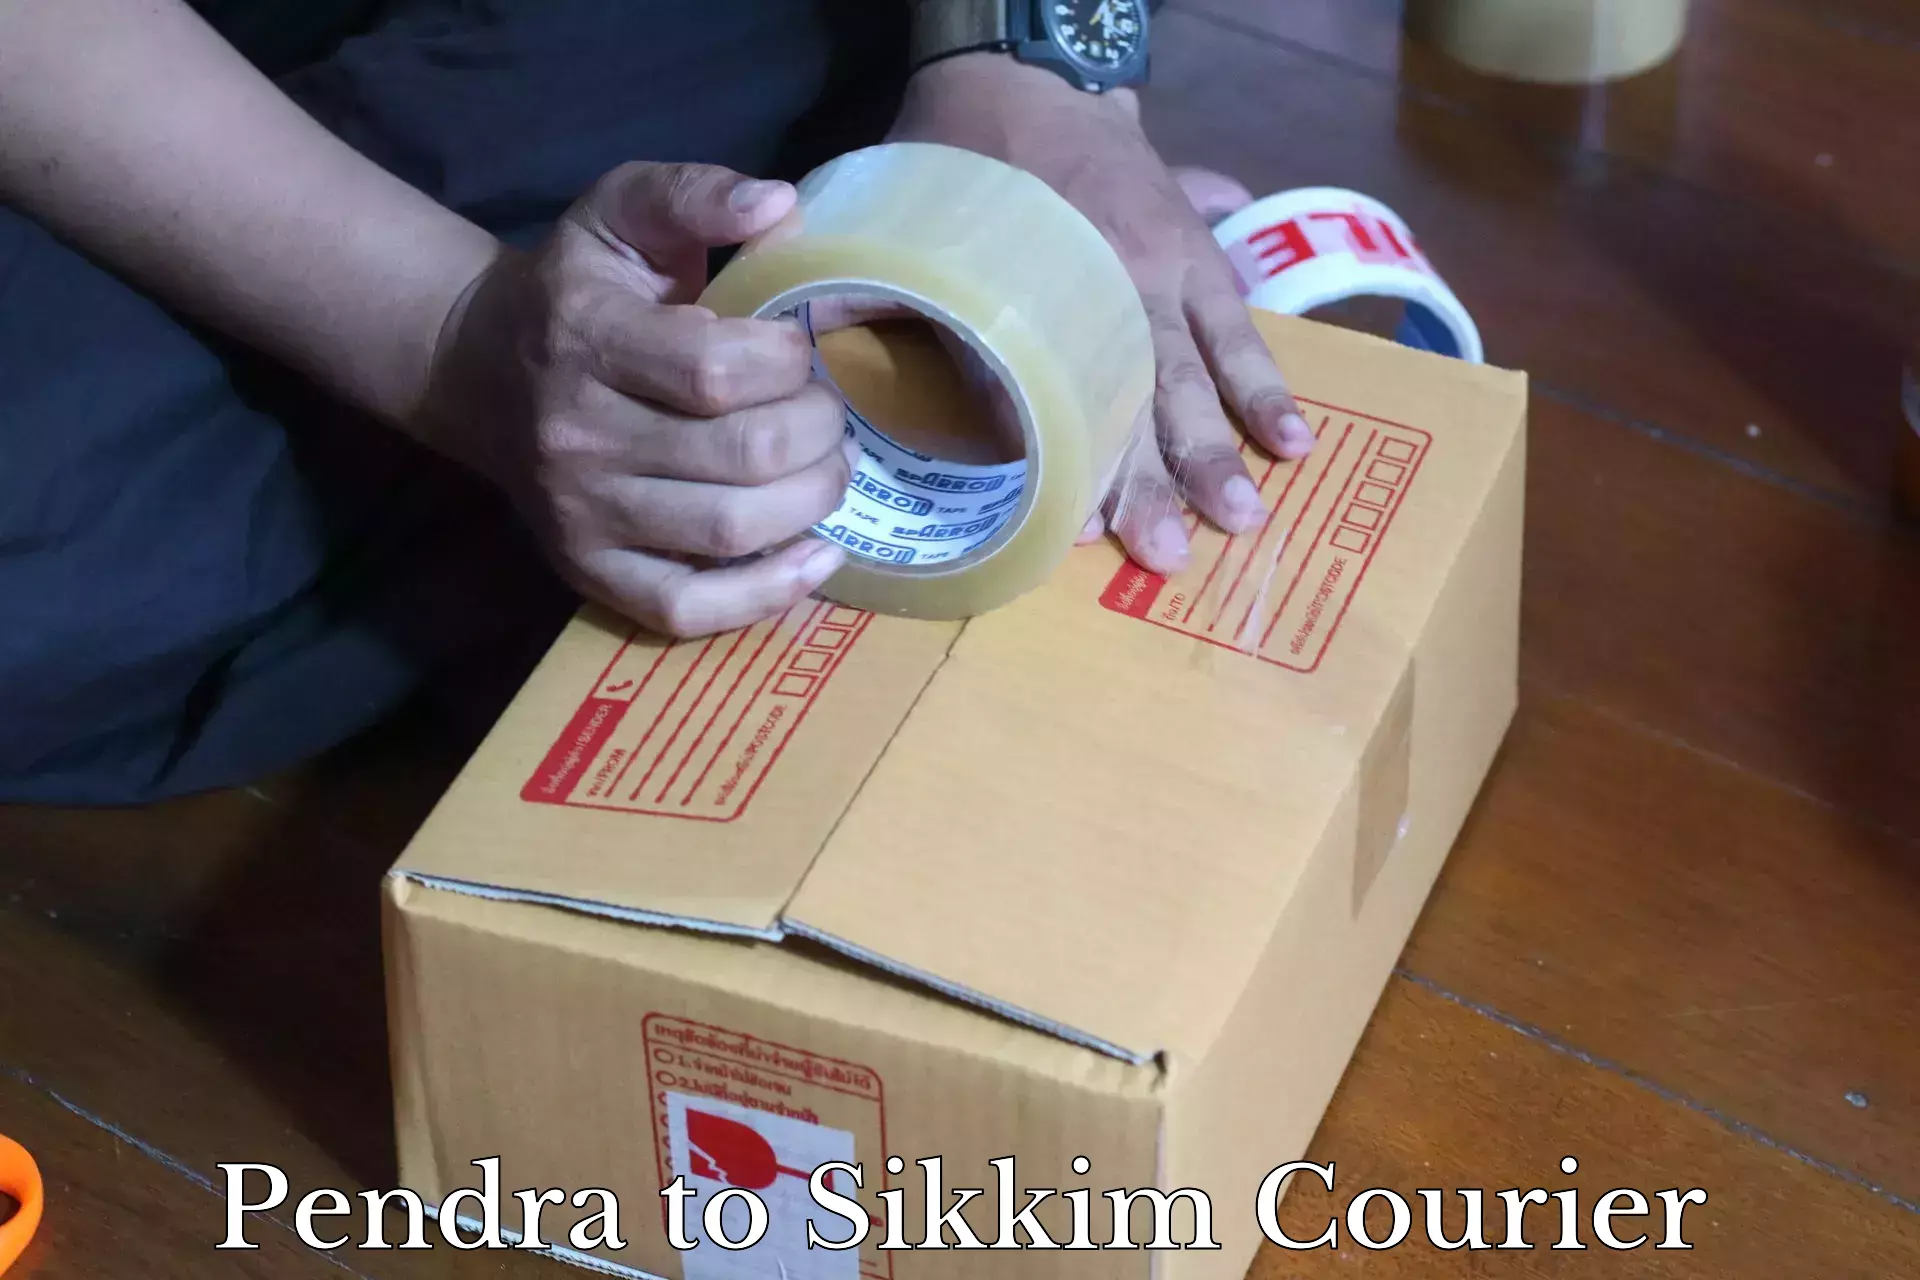 Efficient shipping platforms Pendra to North Sikkim